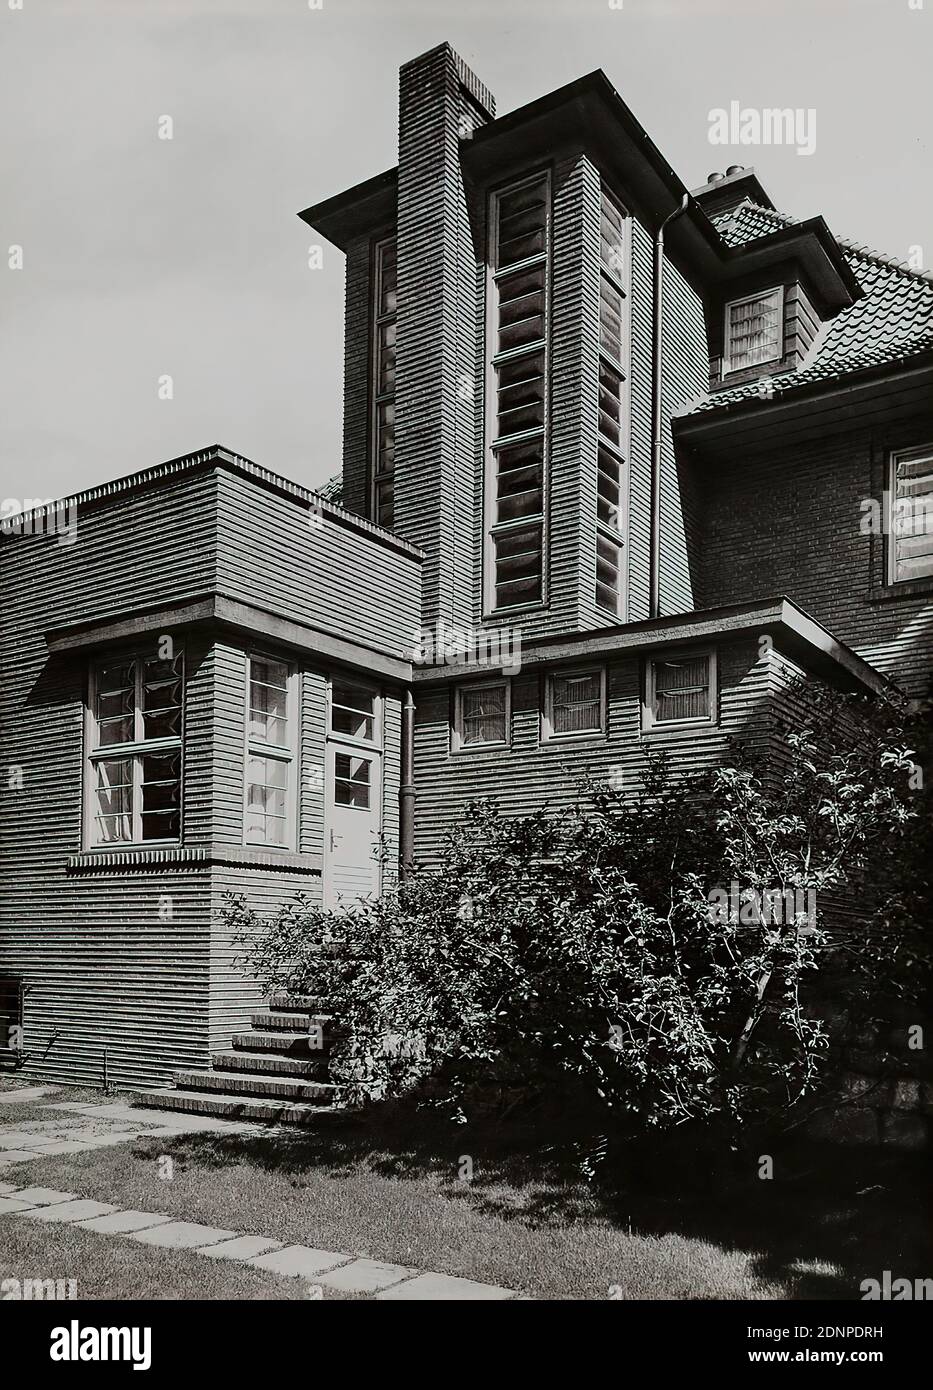 Carl Dransfeld, Residential house for Erich Madsack, Hannover-List, Silver gelatin paper, black and white positive process, Image size: Height: 23,00 cm; Width: 16,70 cm, Architectural photography, Residential house, multi-storey building, Facade, house, building, Architecture, The photograph shows the side view of the single-family house for Erich Madsack in Hannover-List, Walderseestraße 3. The building for the publisher of the Hannoversche Anzeiger was built in 1928 according to plans by the architect Fritz Höger Stock Photo